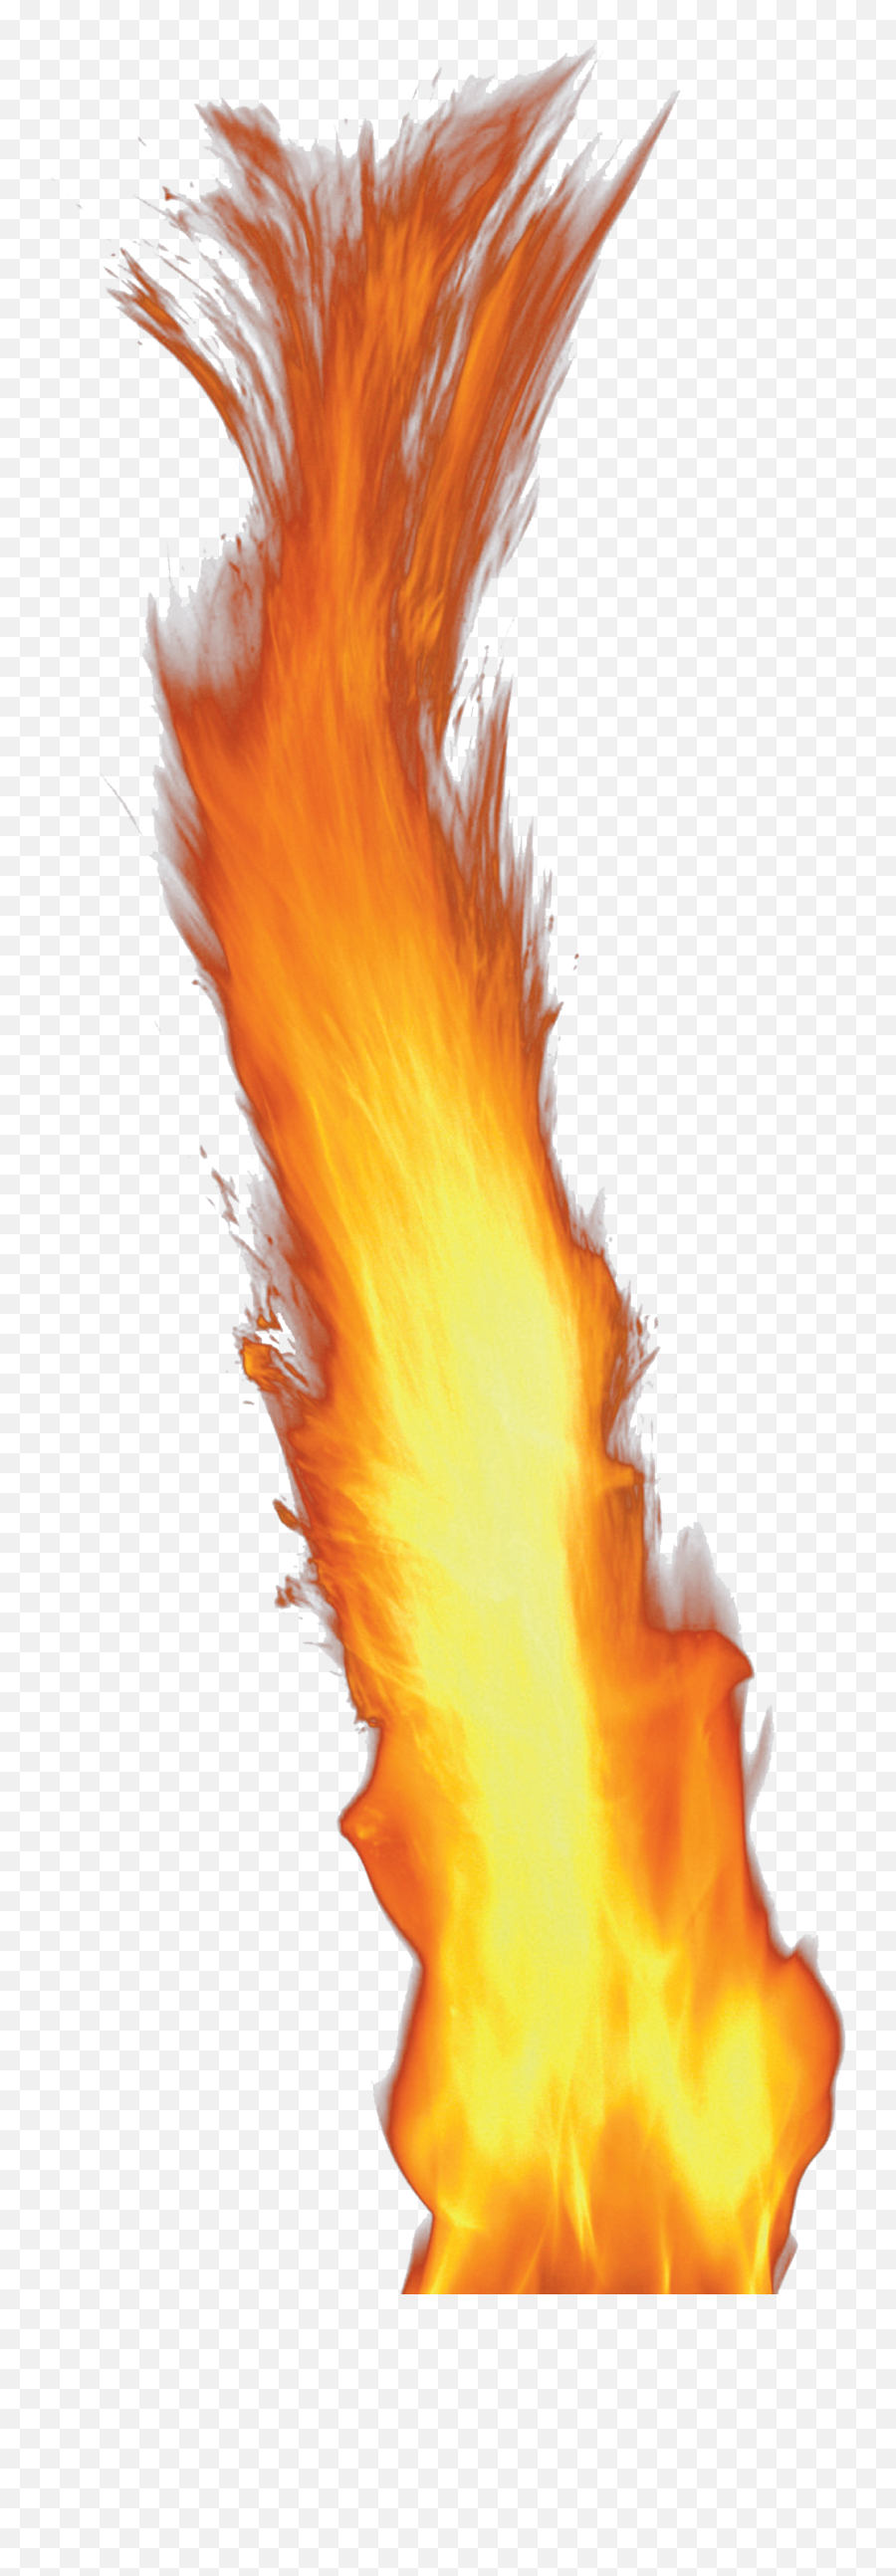 Realistic Fire Png Images Collection - Fire Gif No Background Emoji,Fire Emoji Jpg